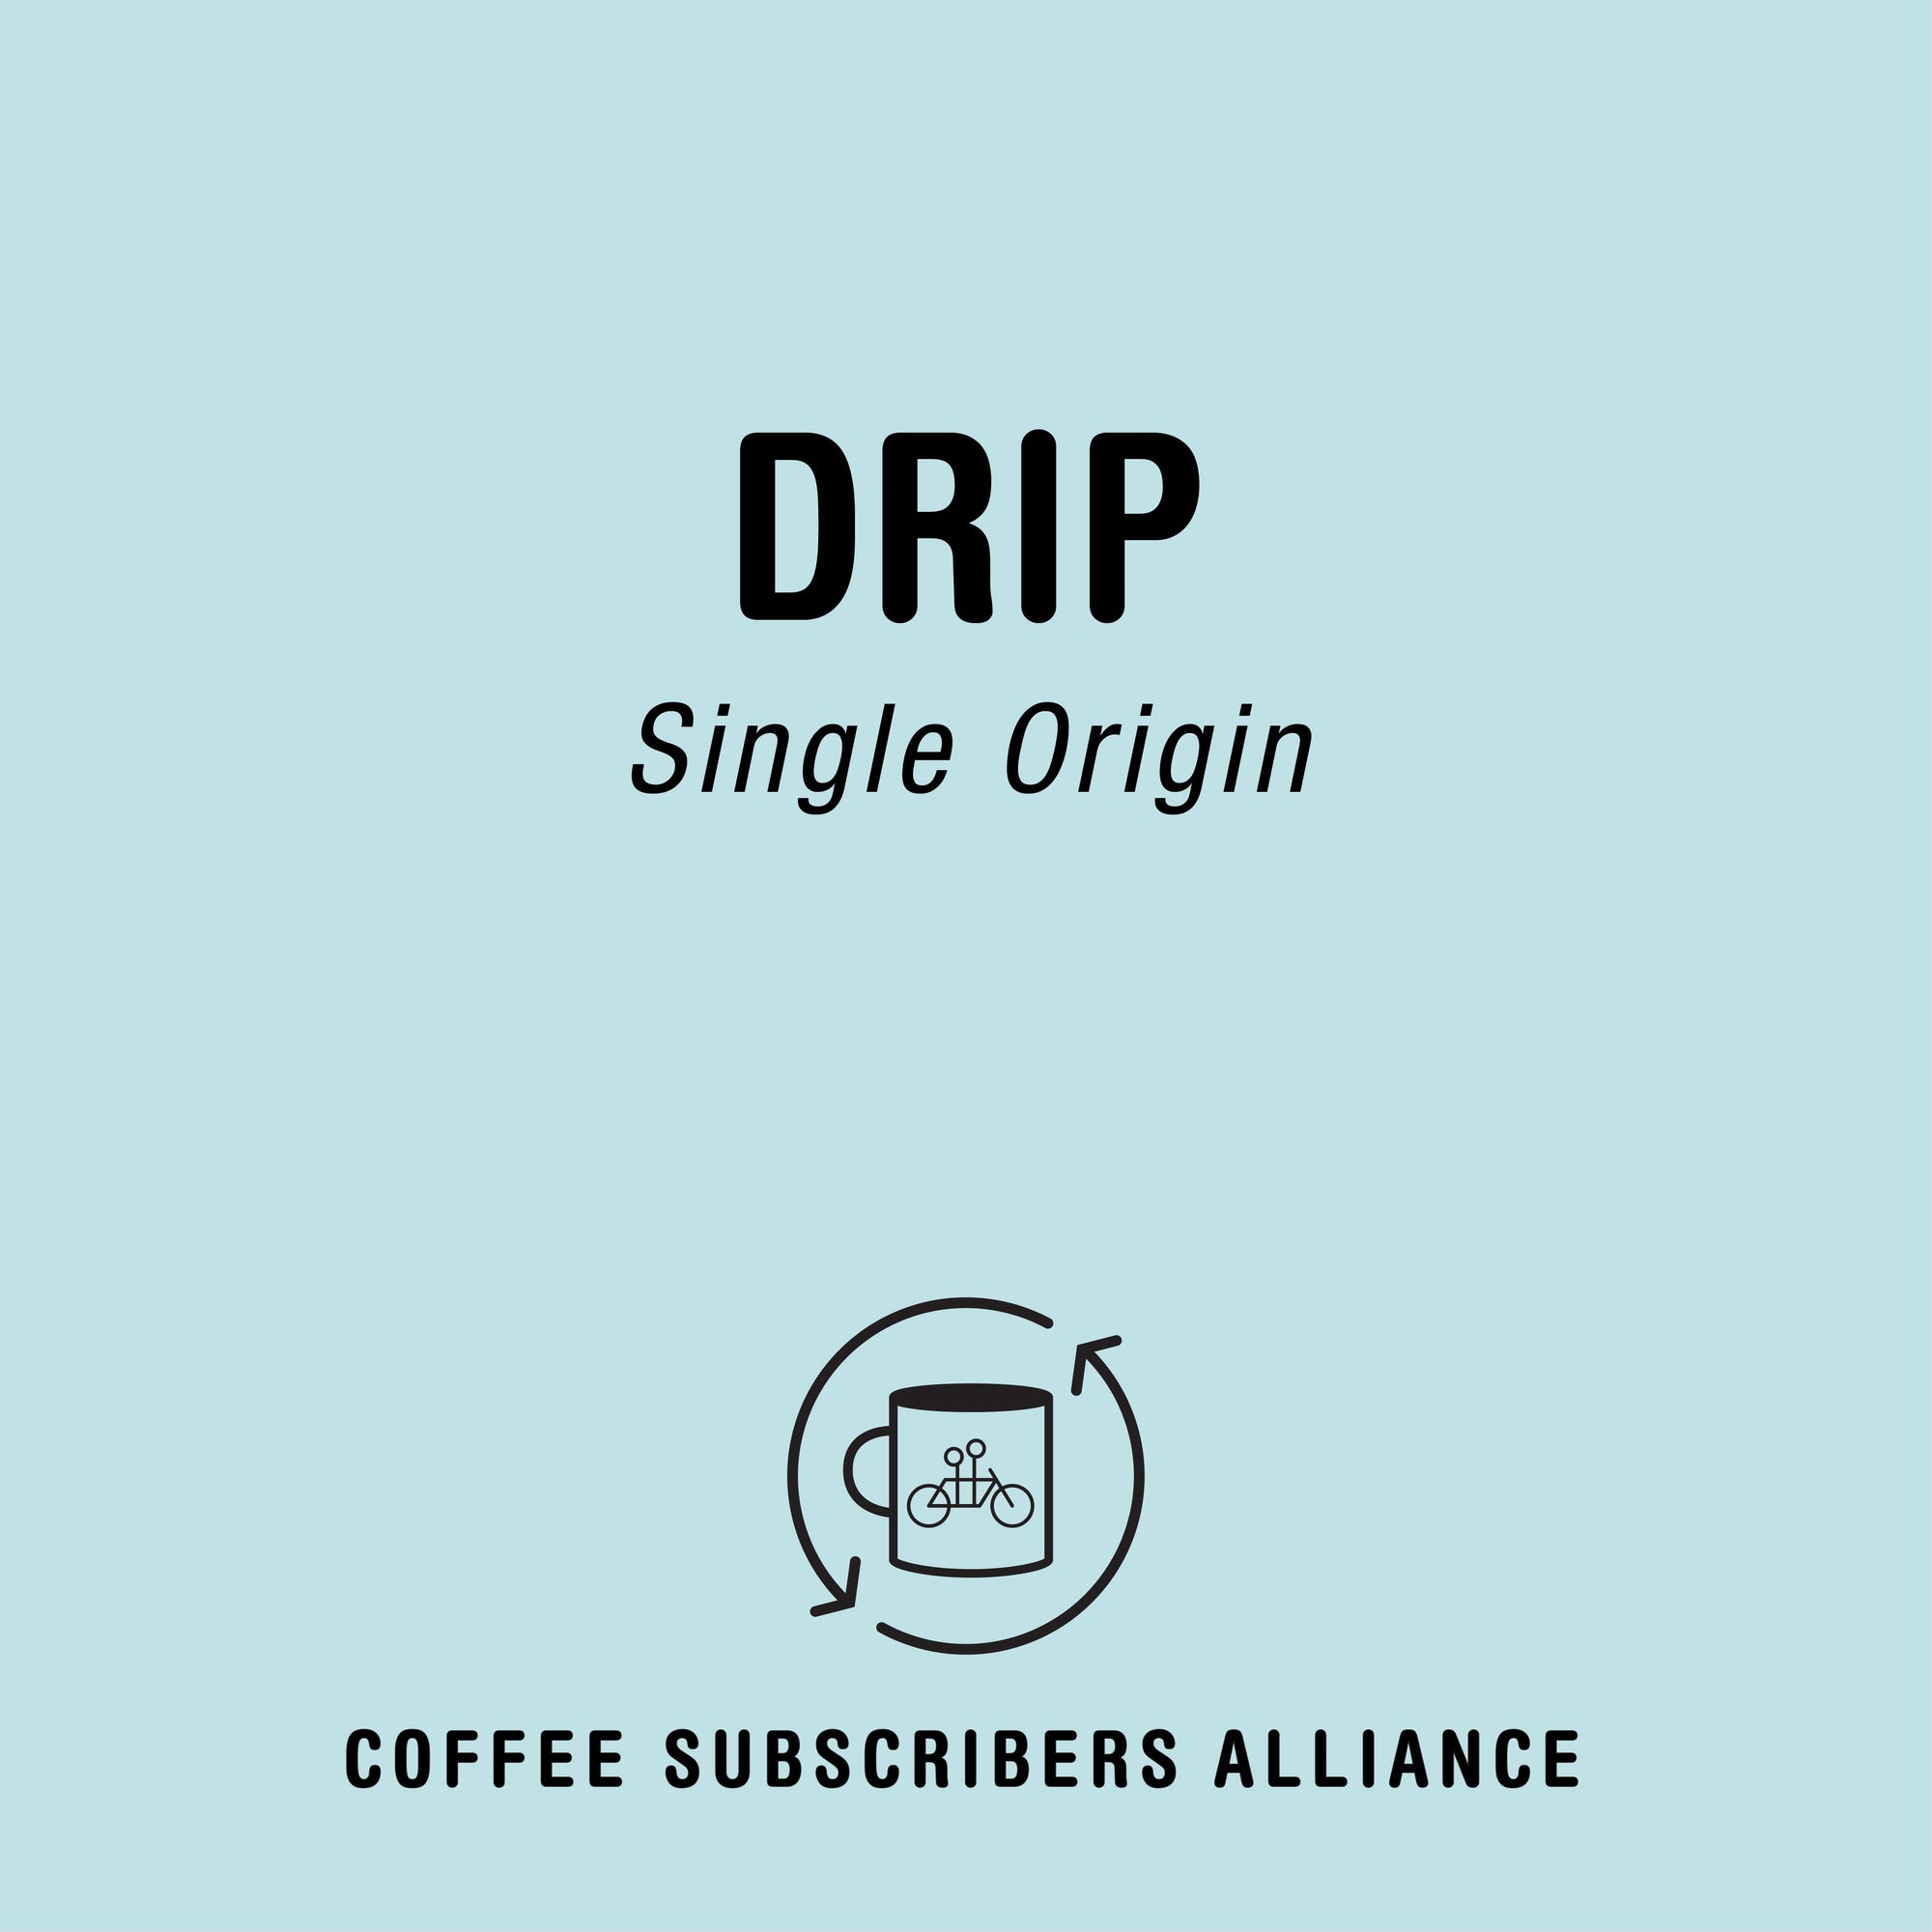 Logo of Tandem's "Drip Subscription Gift - 2 Weeks x 6" featuring the word "drip" at the top, "single origin" below it, and an emblem with a coffee cup encircled by the text.